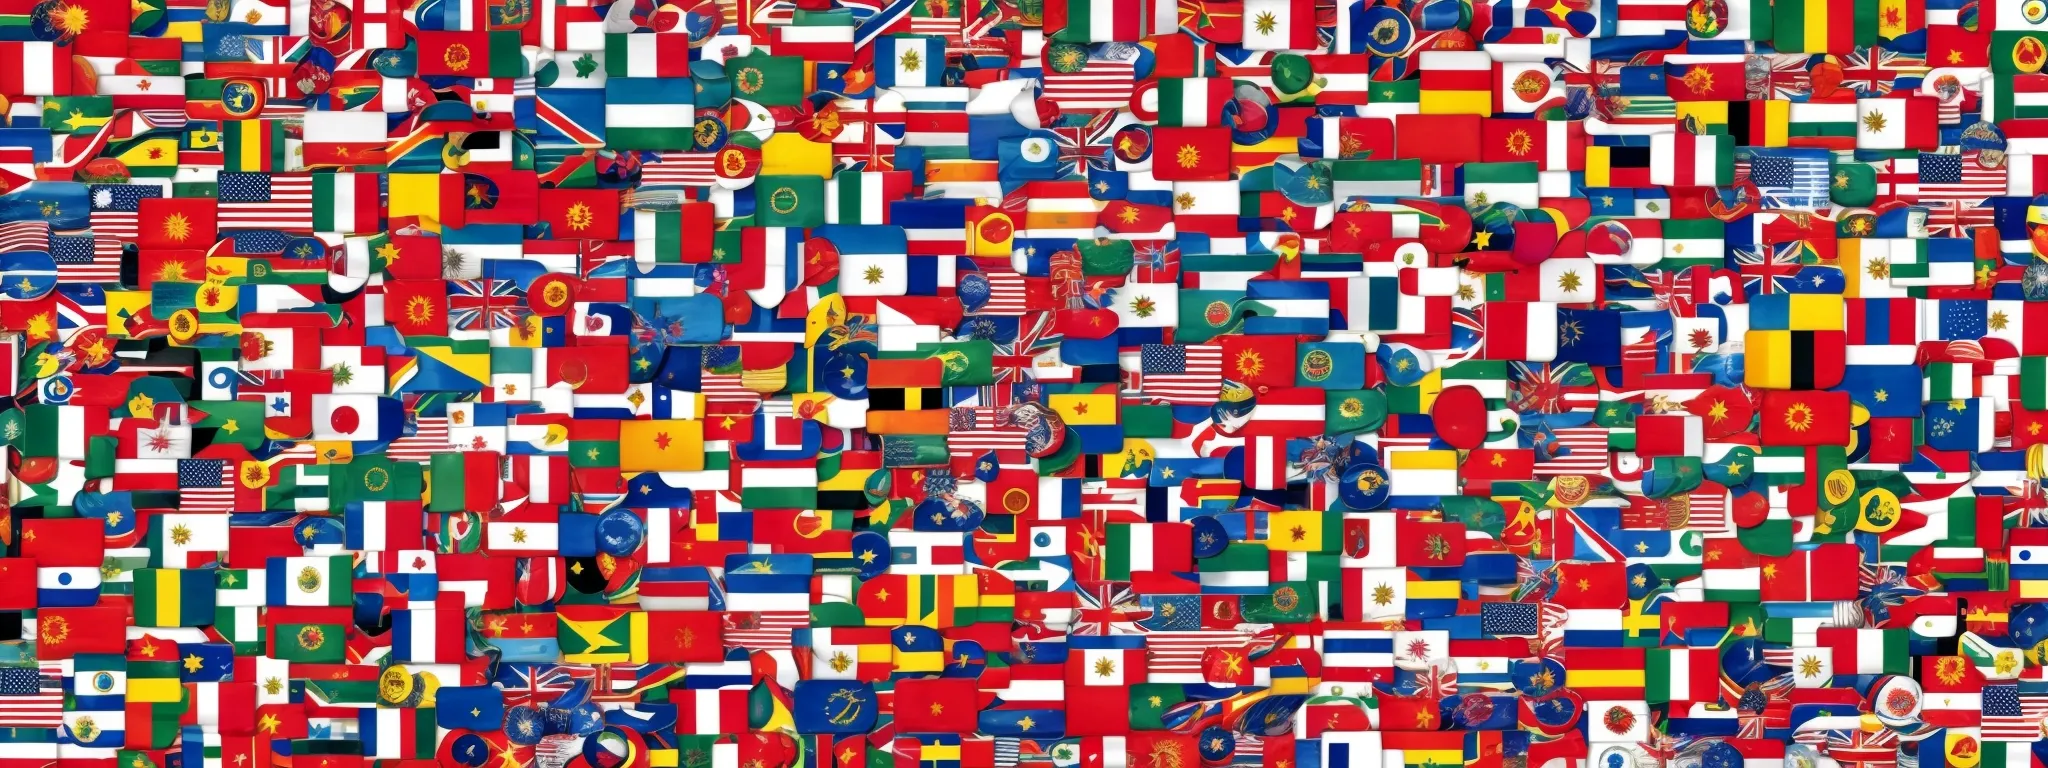 a globe surrounded by various international flags, with a magnifying glass focusing on different regions.